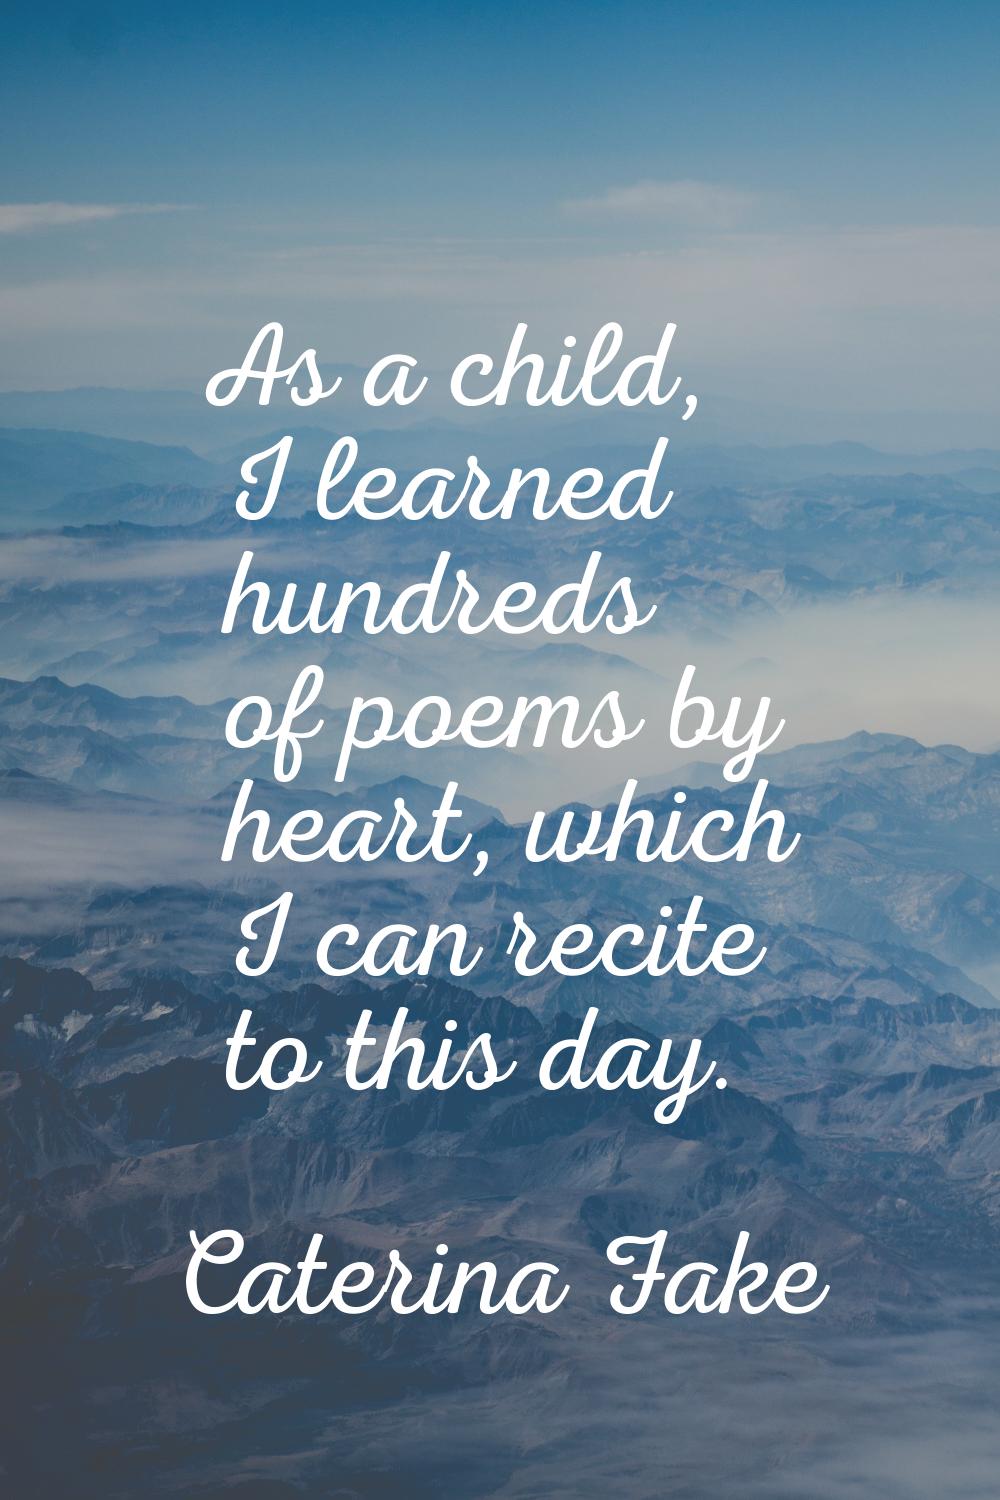 As a child, I learned hundreds of poems by heart, which I can recite to this day.